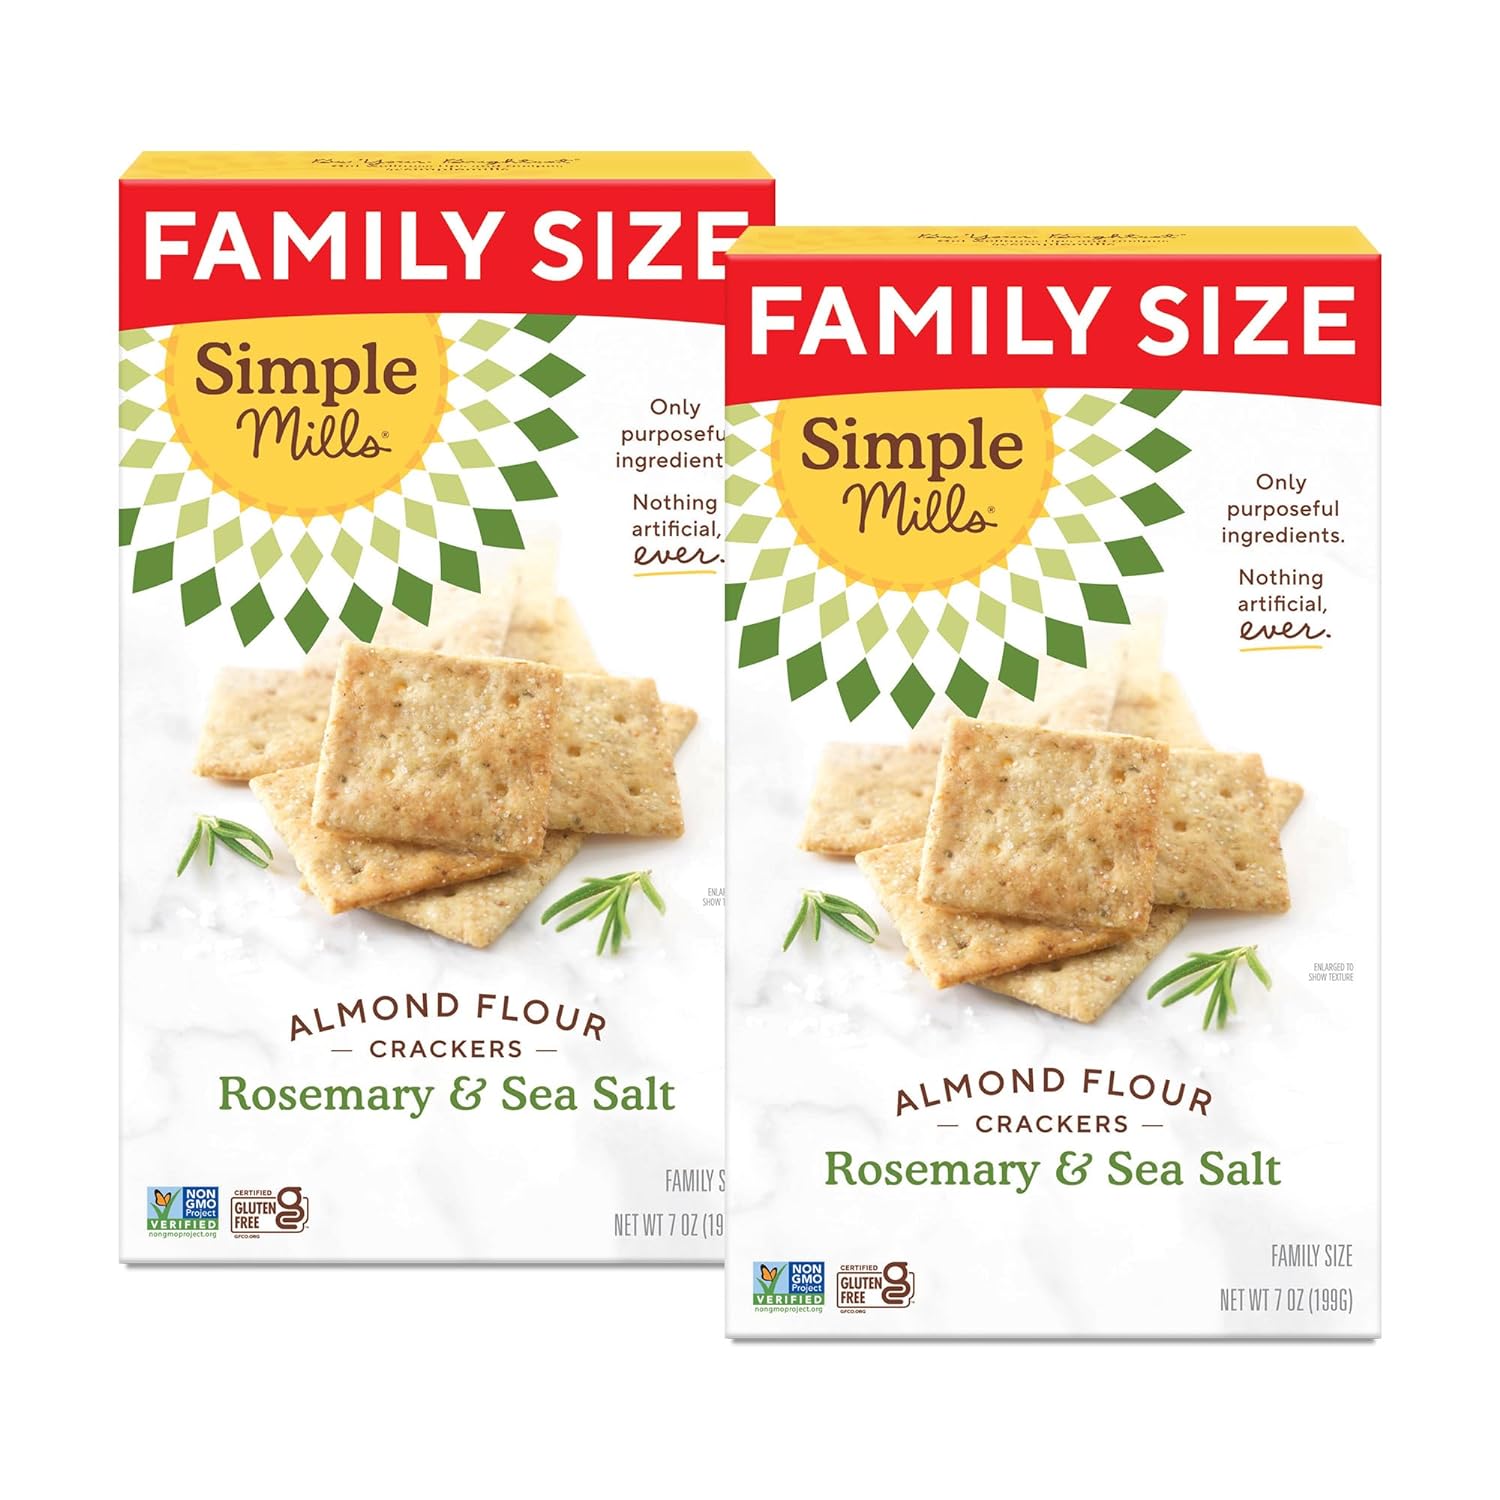 Simple Mills Almond Flour Crackers, Family Size, Rosemary & Sea Salt - Gluten Free, Vegan, Healthy Snacks, 7 Ounce (Pack of 2)